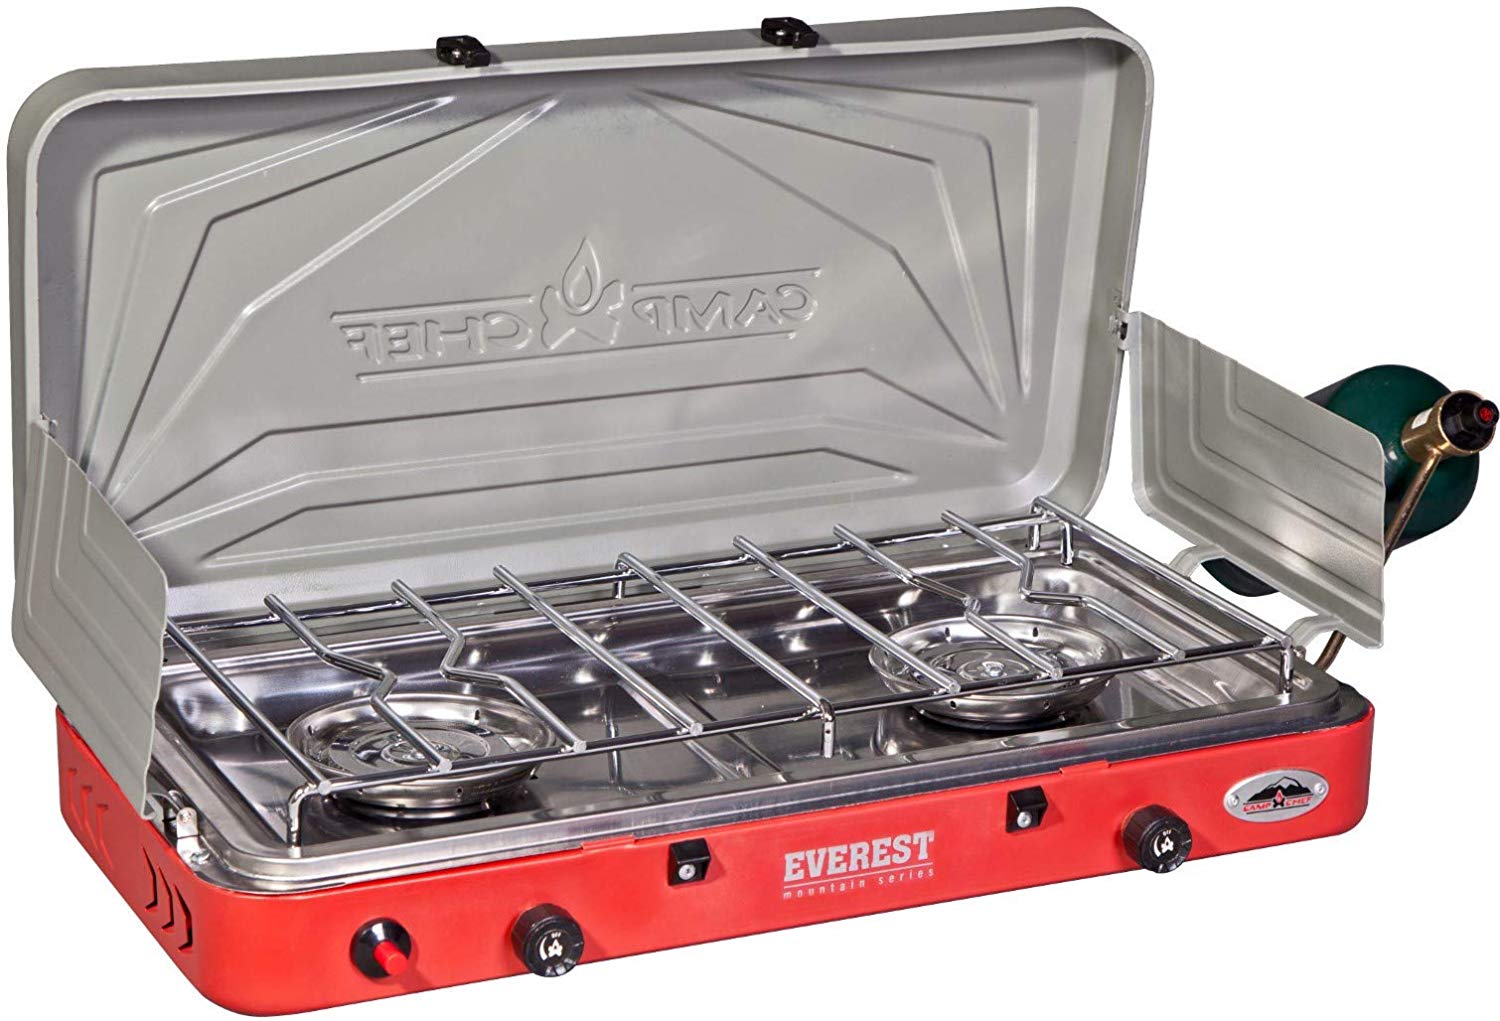 Camp Chef Everest Double Stainless Steel Camping Stove